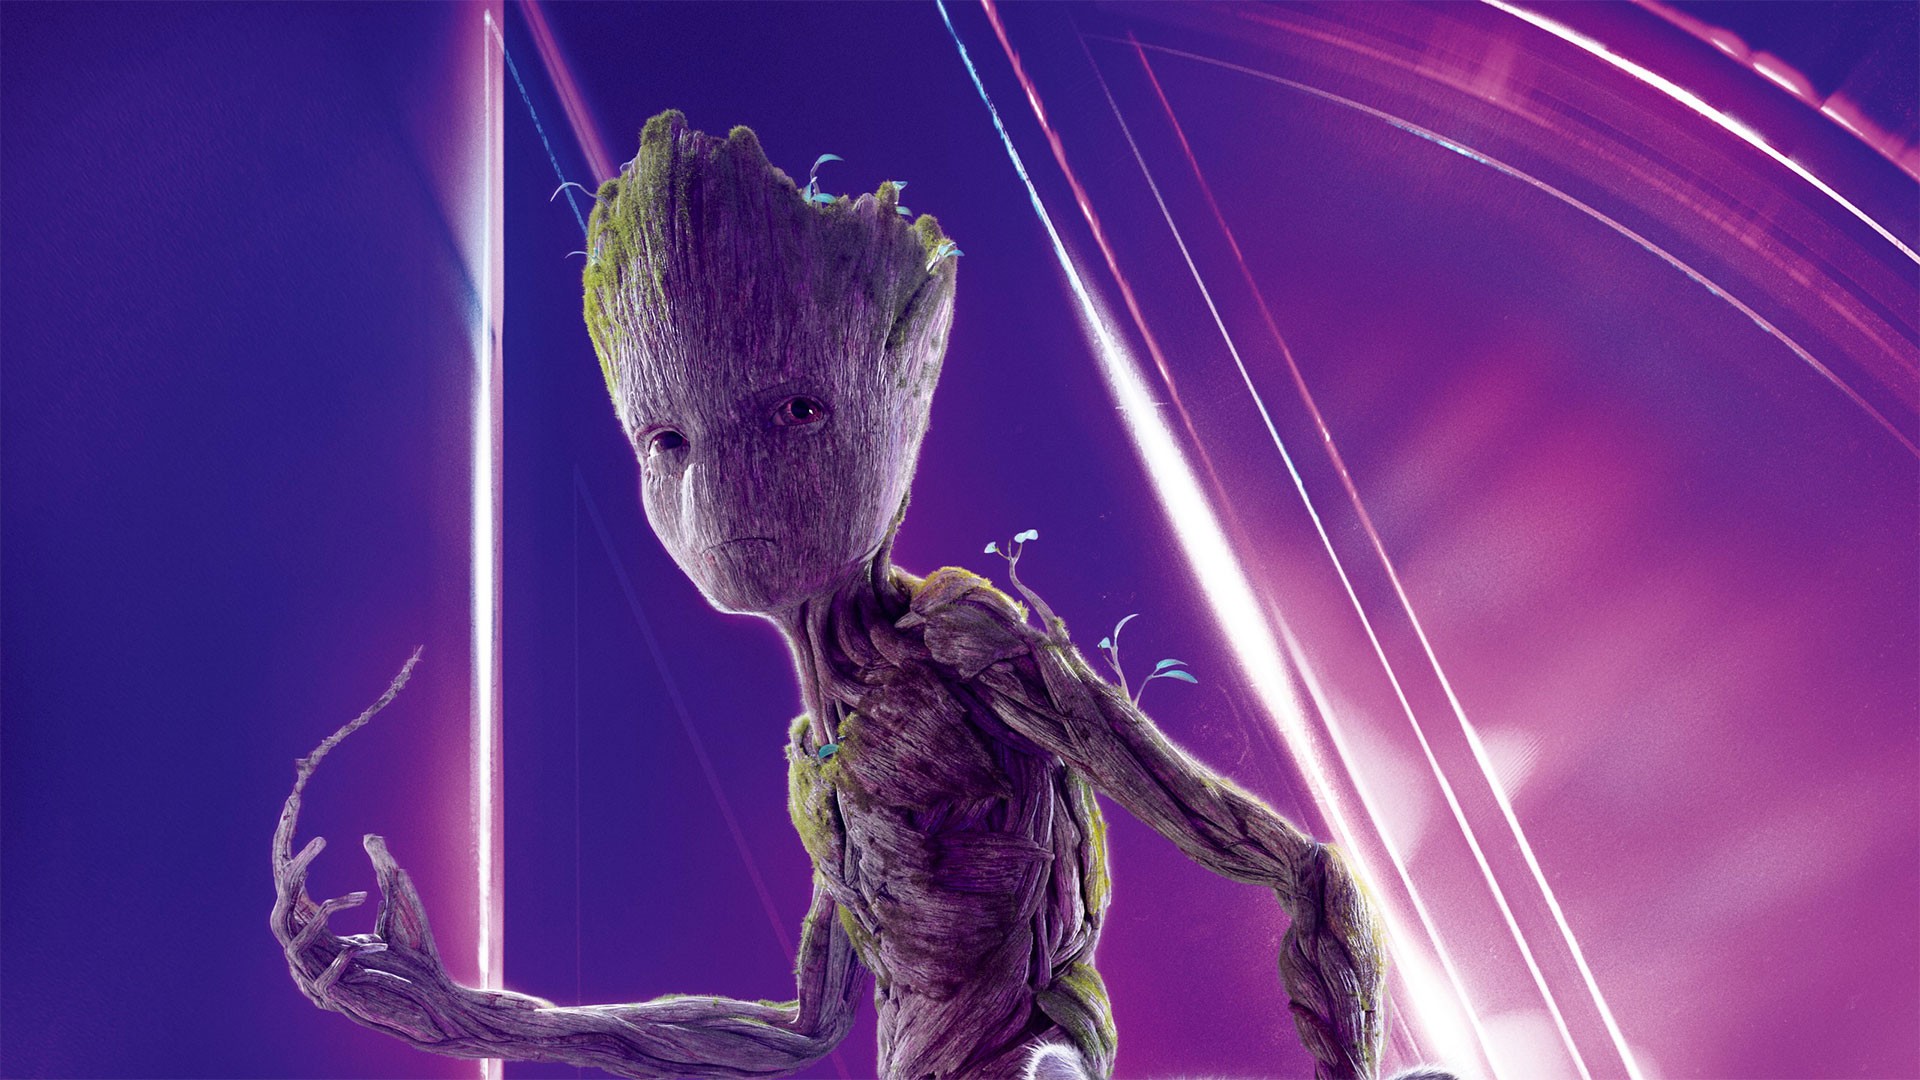 Groot Avengers Endgame Wallpaper HD with high-resolution 1920x1080 pixel. You can use this poster wallpaper for your Desktop Computers, Mac Screensavers, Windows Backgrounds, iPhone Wallpapers, Tablet or Android Lock screen and another Mobile device